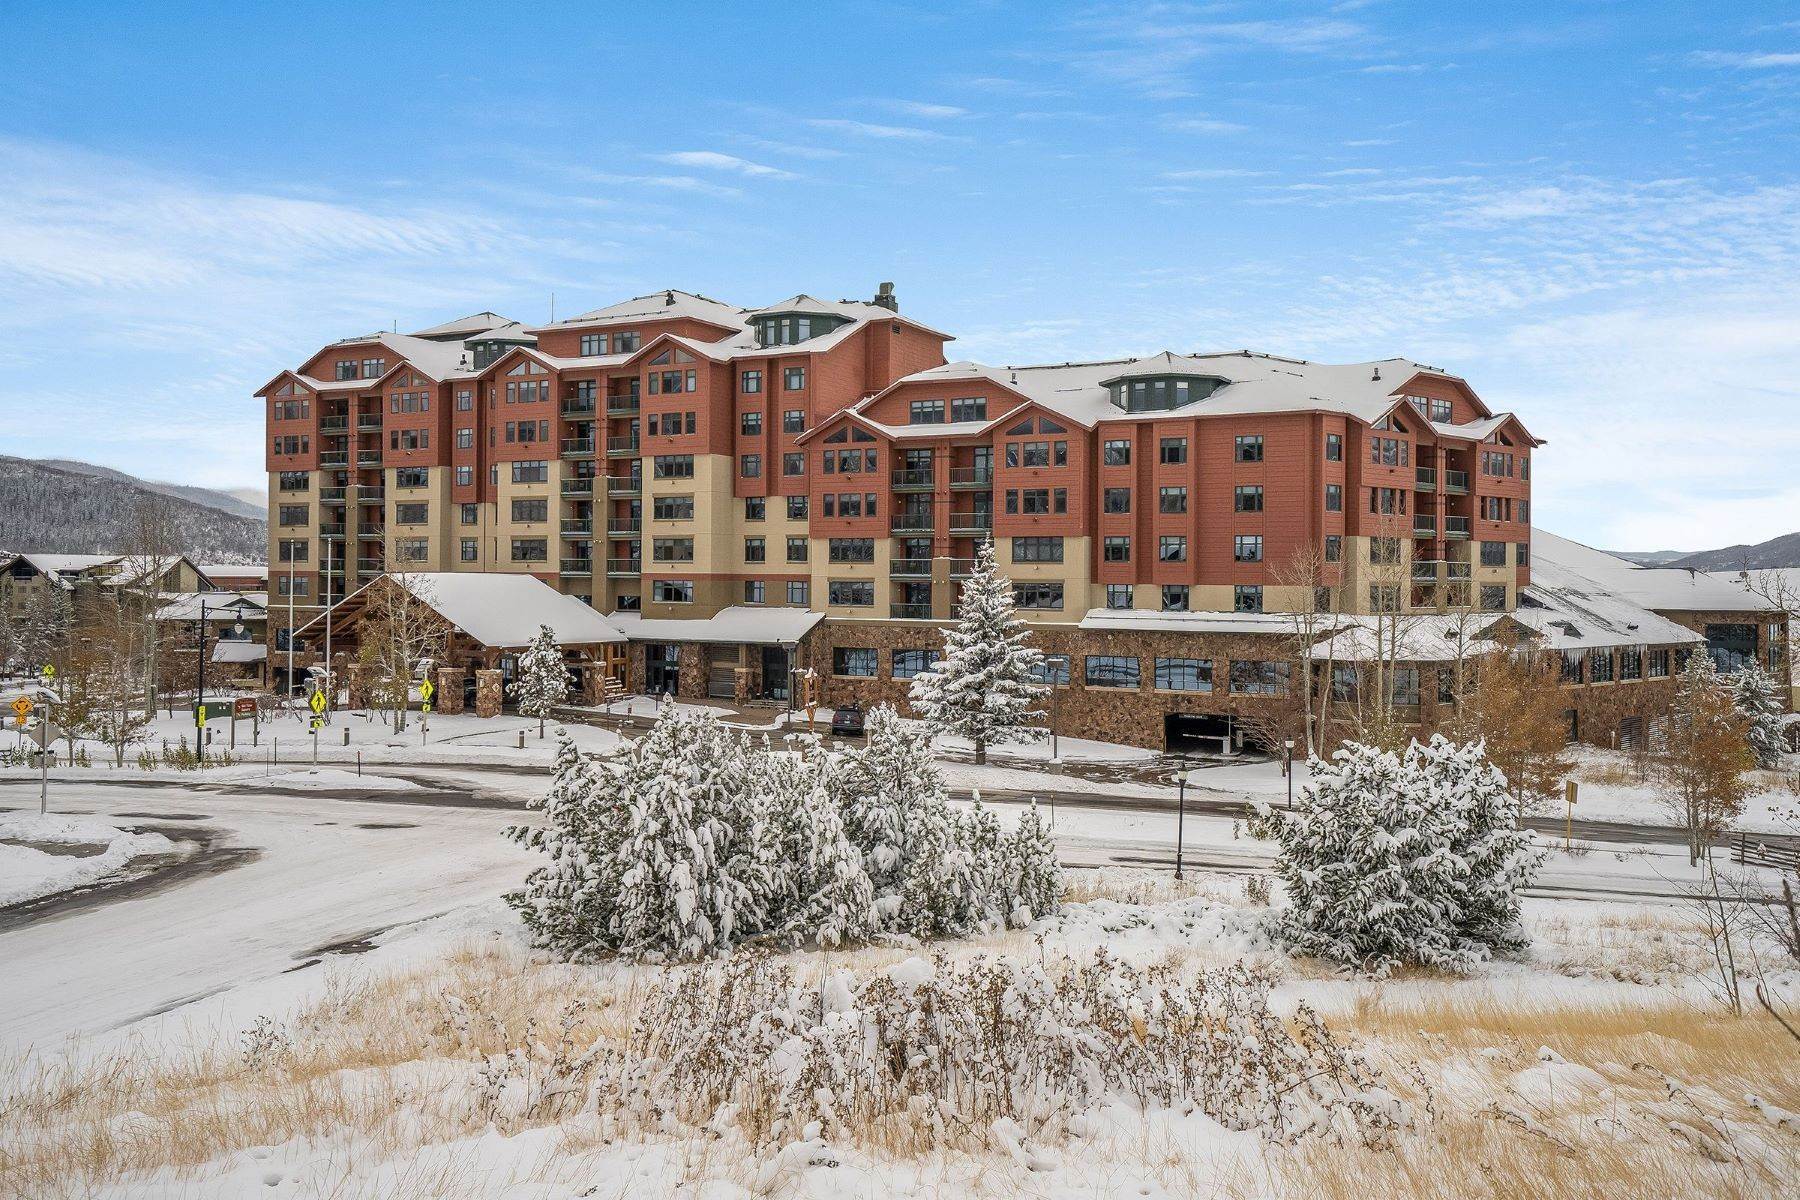 Property for Sale at Third Floor Mogul Unit w/ Ski Area Views 2300 Mount Werner Circle, Unit# 353 Steamboat Springs, Colorado 80487 United States